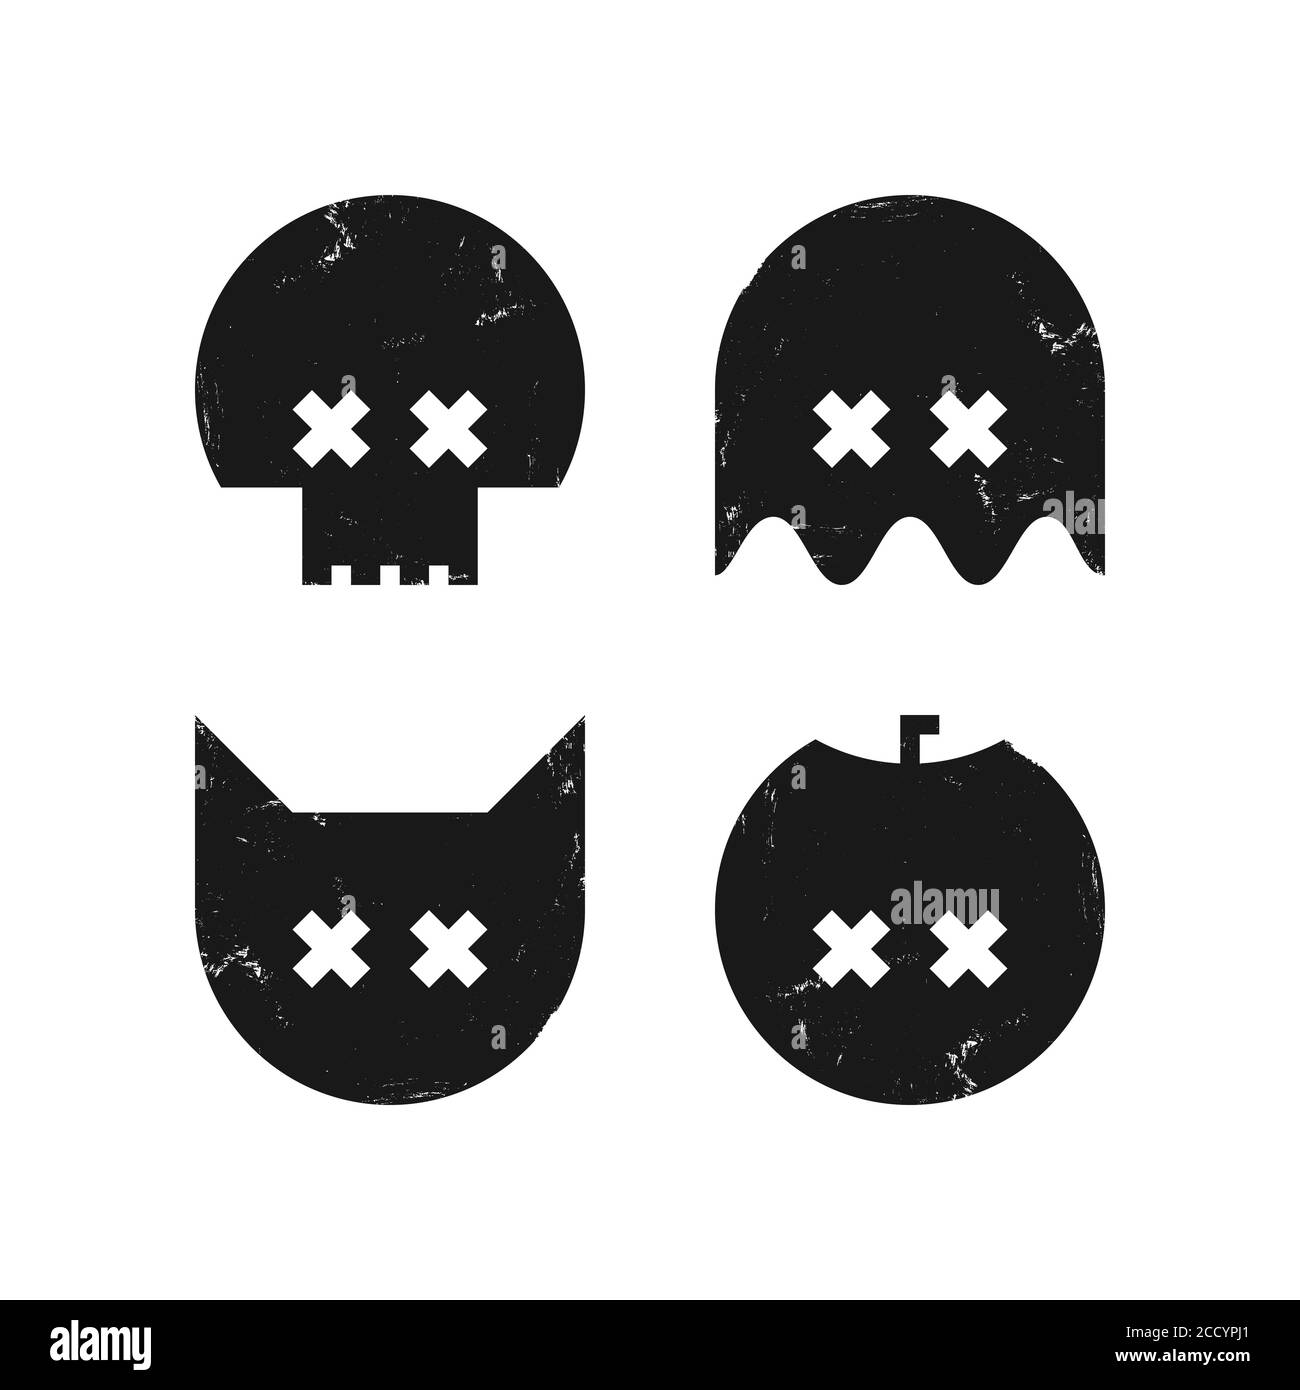 Halloween graphic black and white set. Textured icons of skull, ghost, cat and pumpkin. Stock Vector